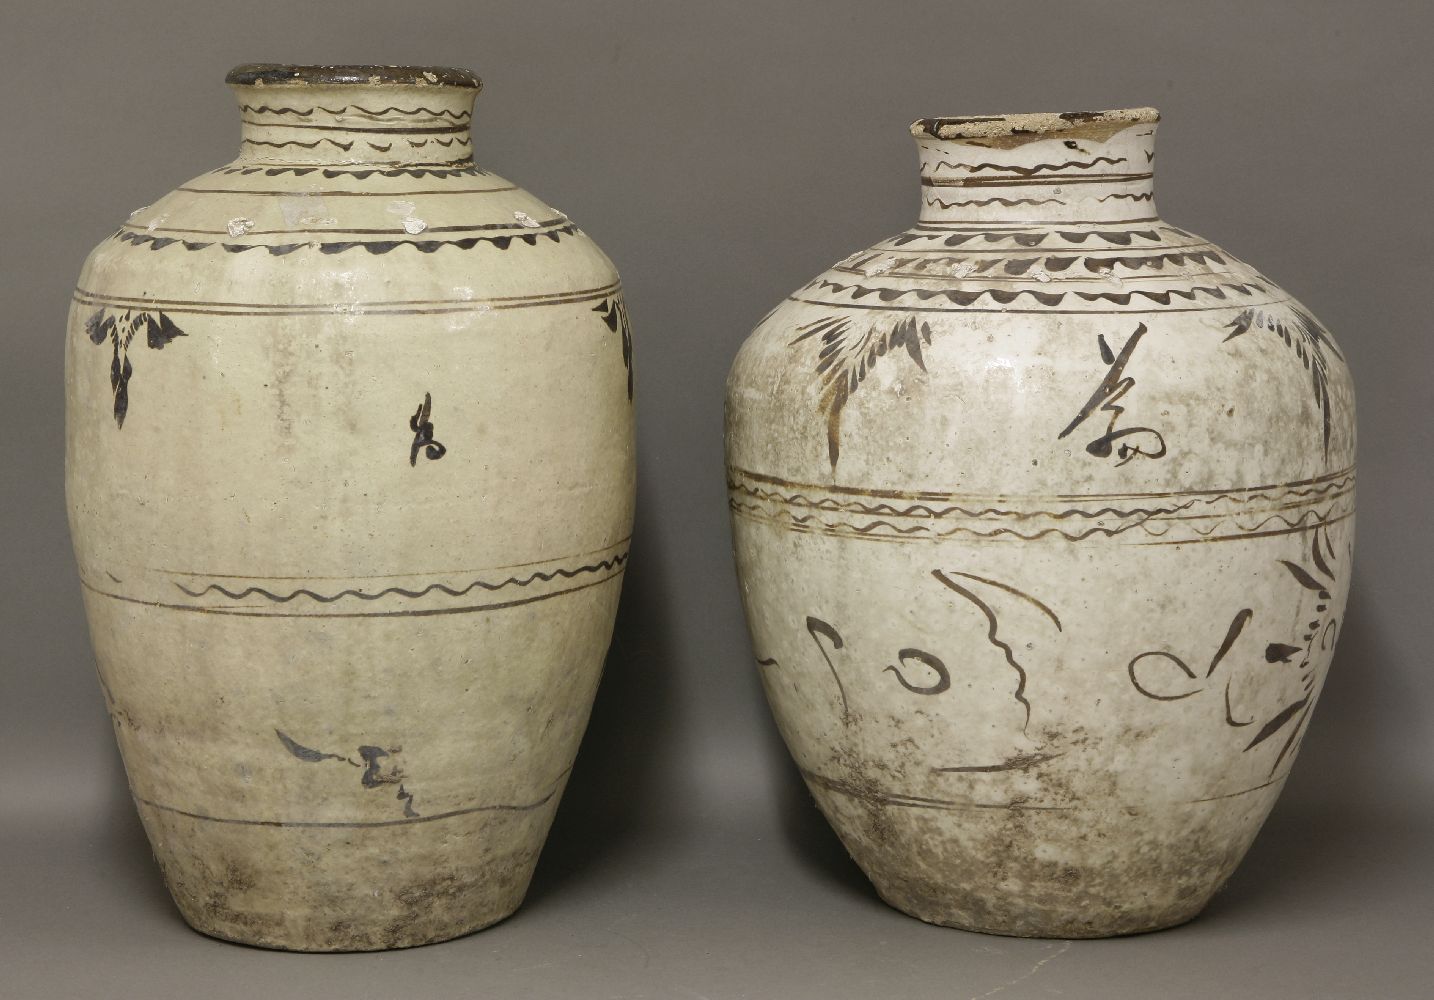 Two Cizhou Vases,Ming dynasty (1368-1644), each ovoid body with a yellow glaze, painted in brown - Image 2 of 2